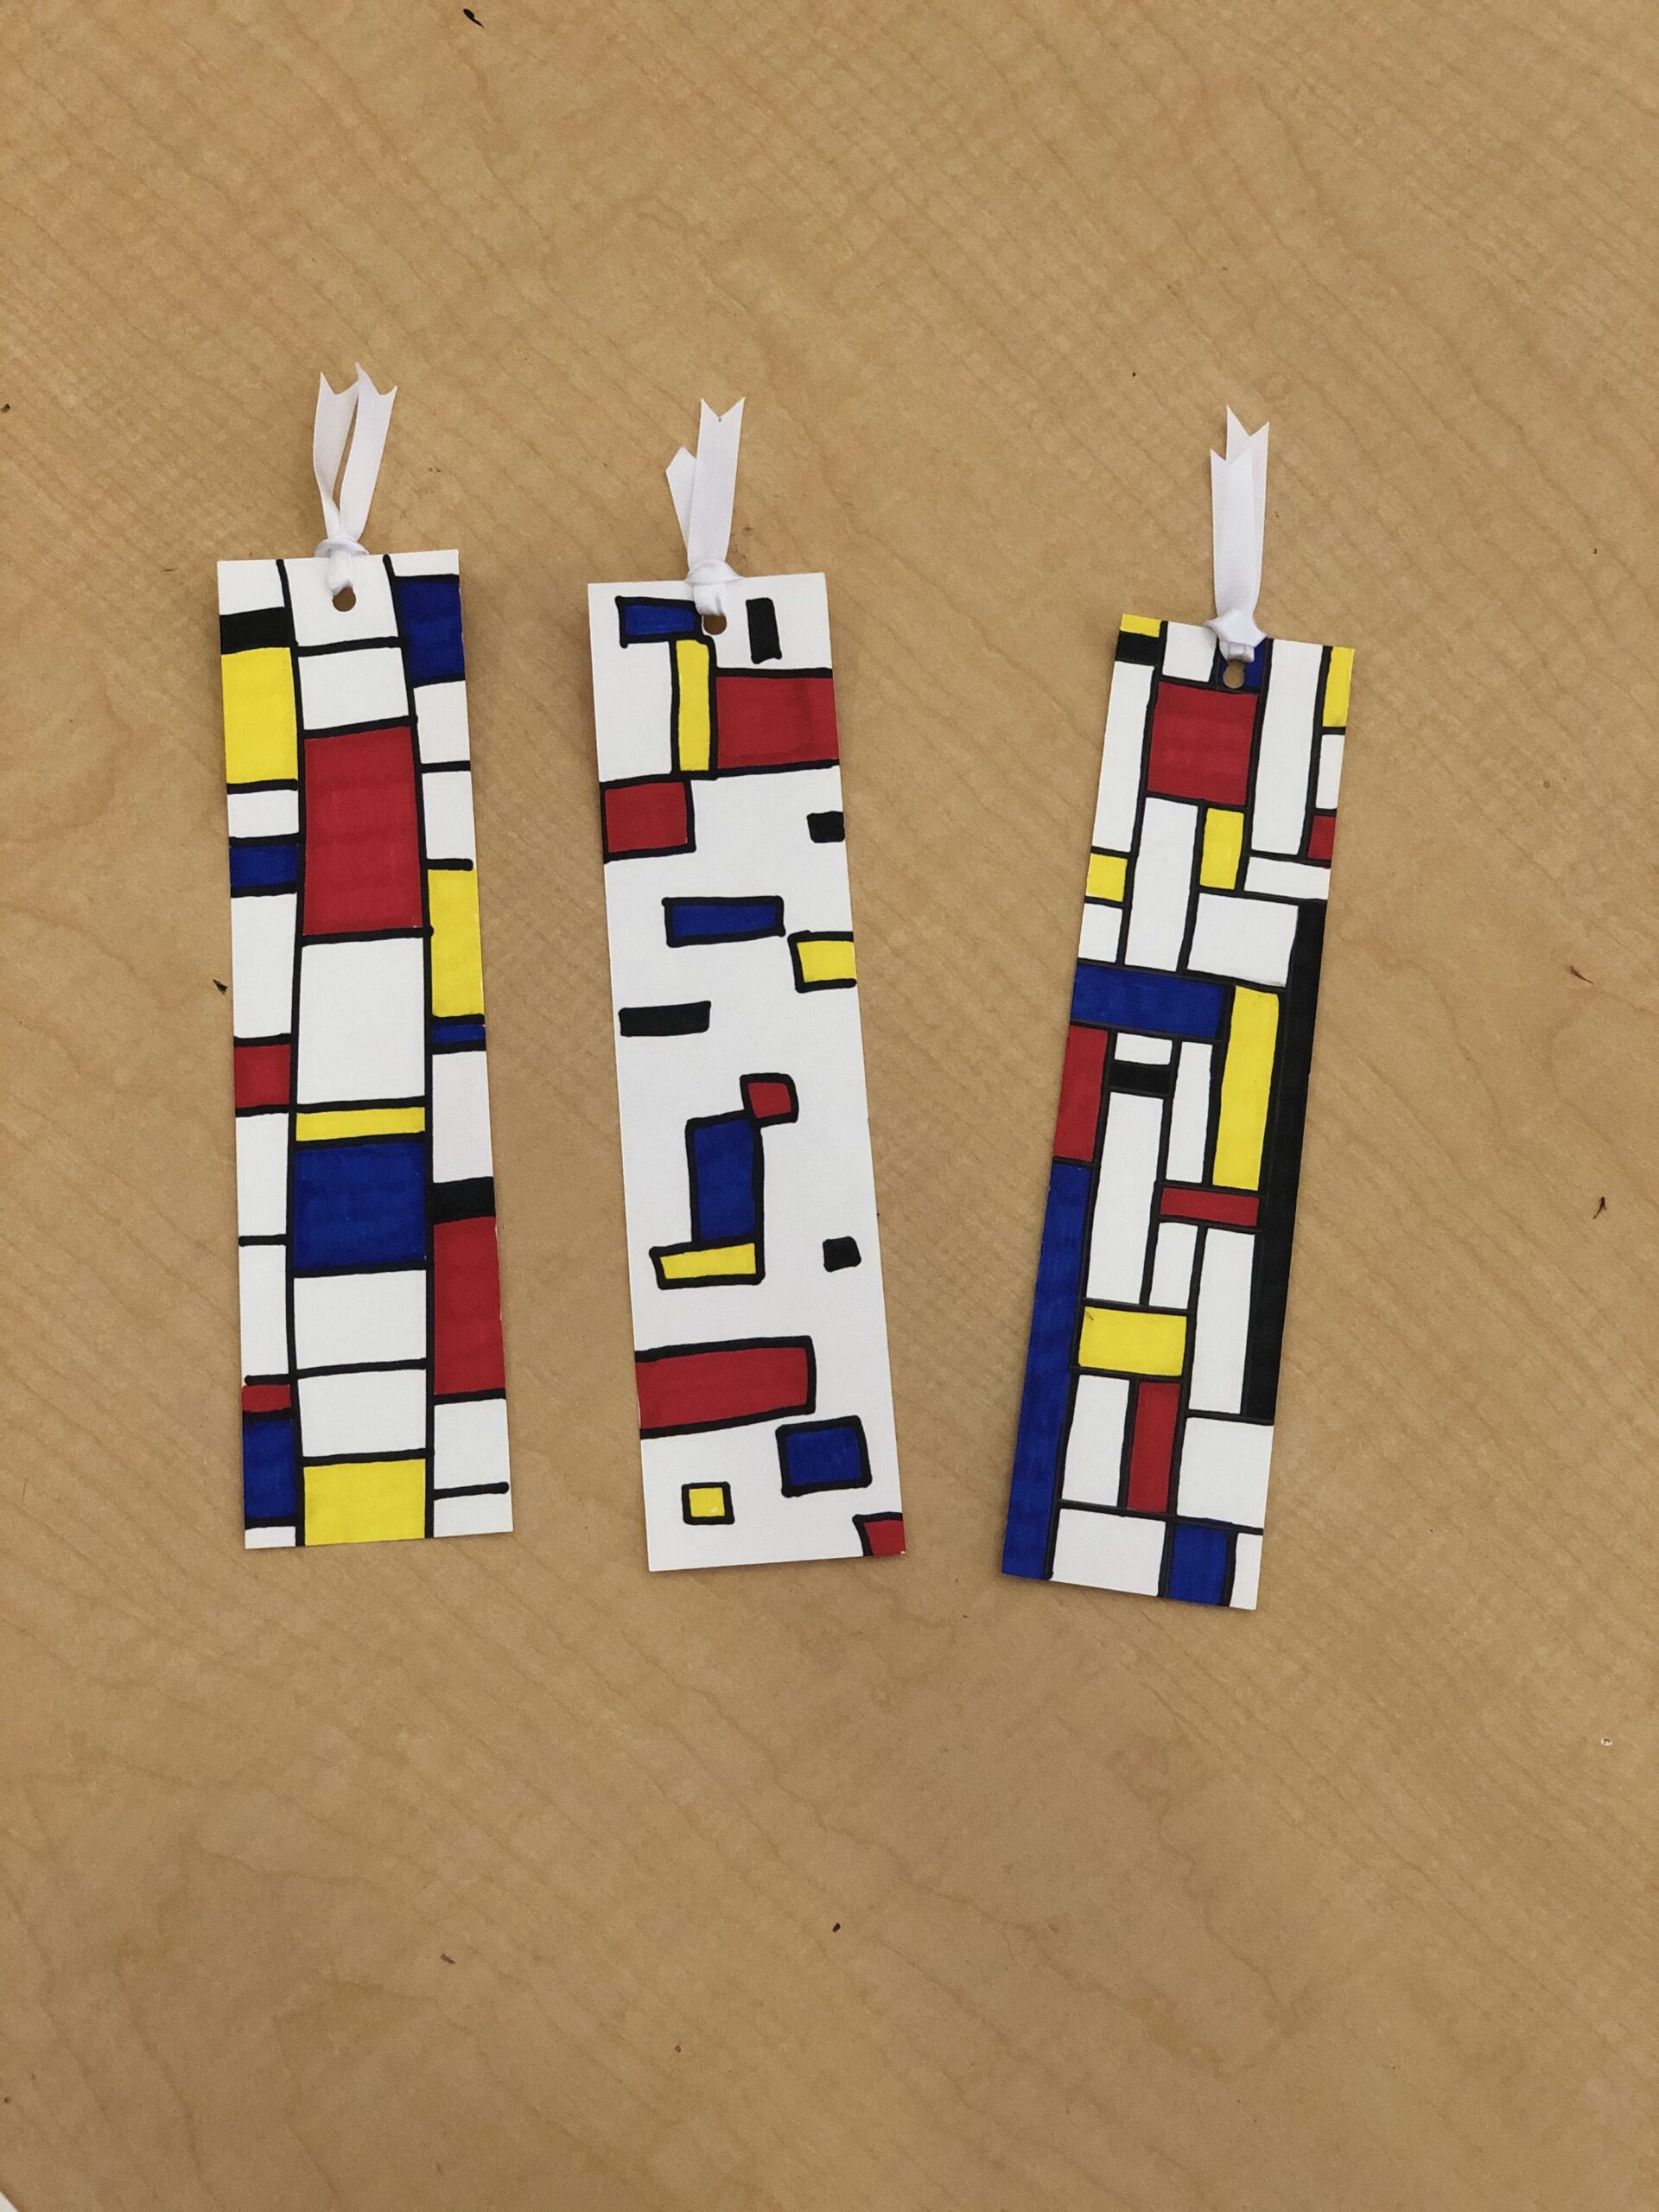 Creating ways to think about abstract art while learning about Piet Mondrian